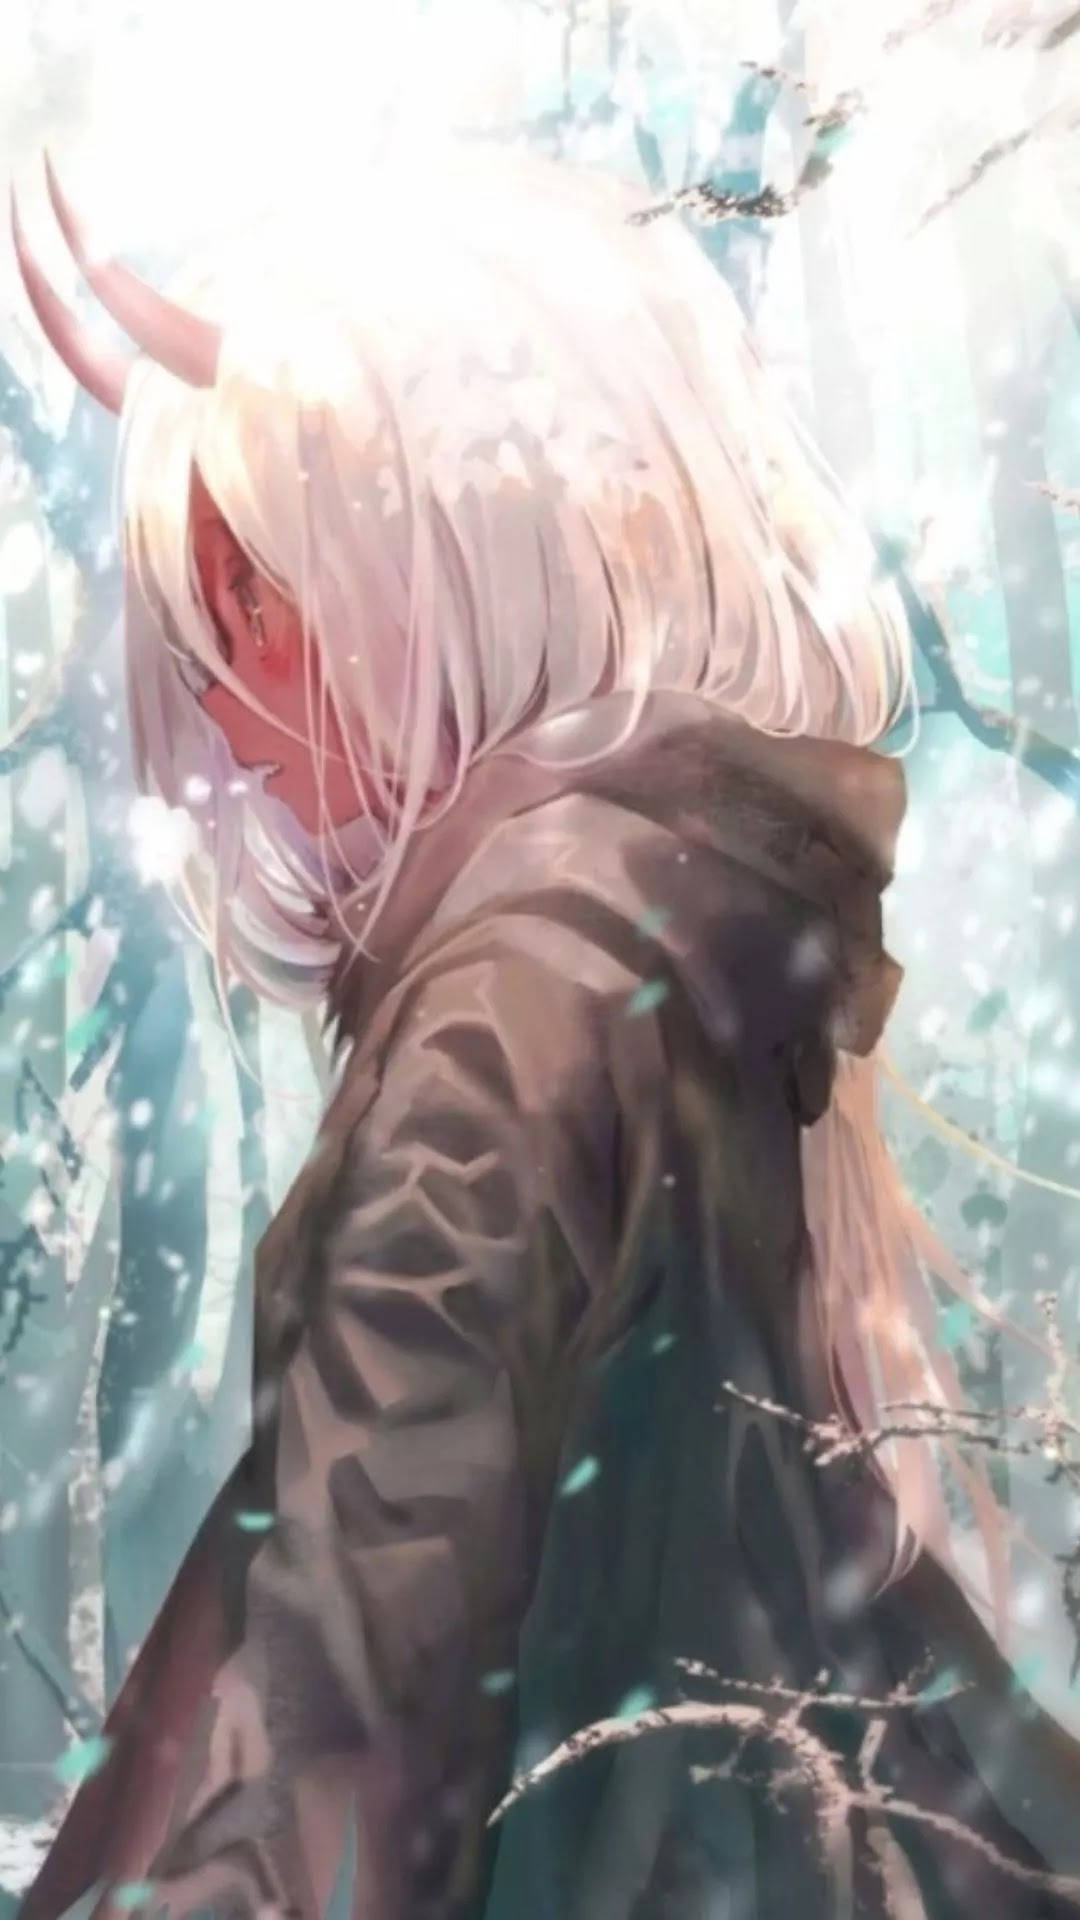 A Girl With Long Hair And Horns In The Snow Wallpaper